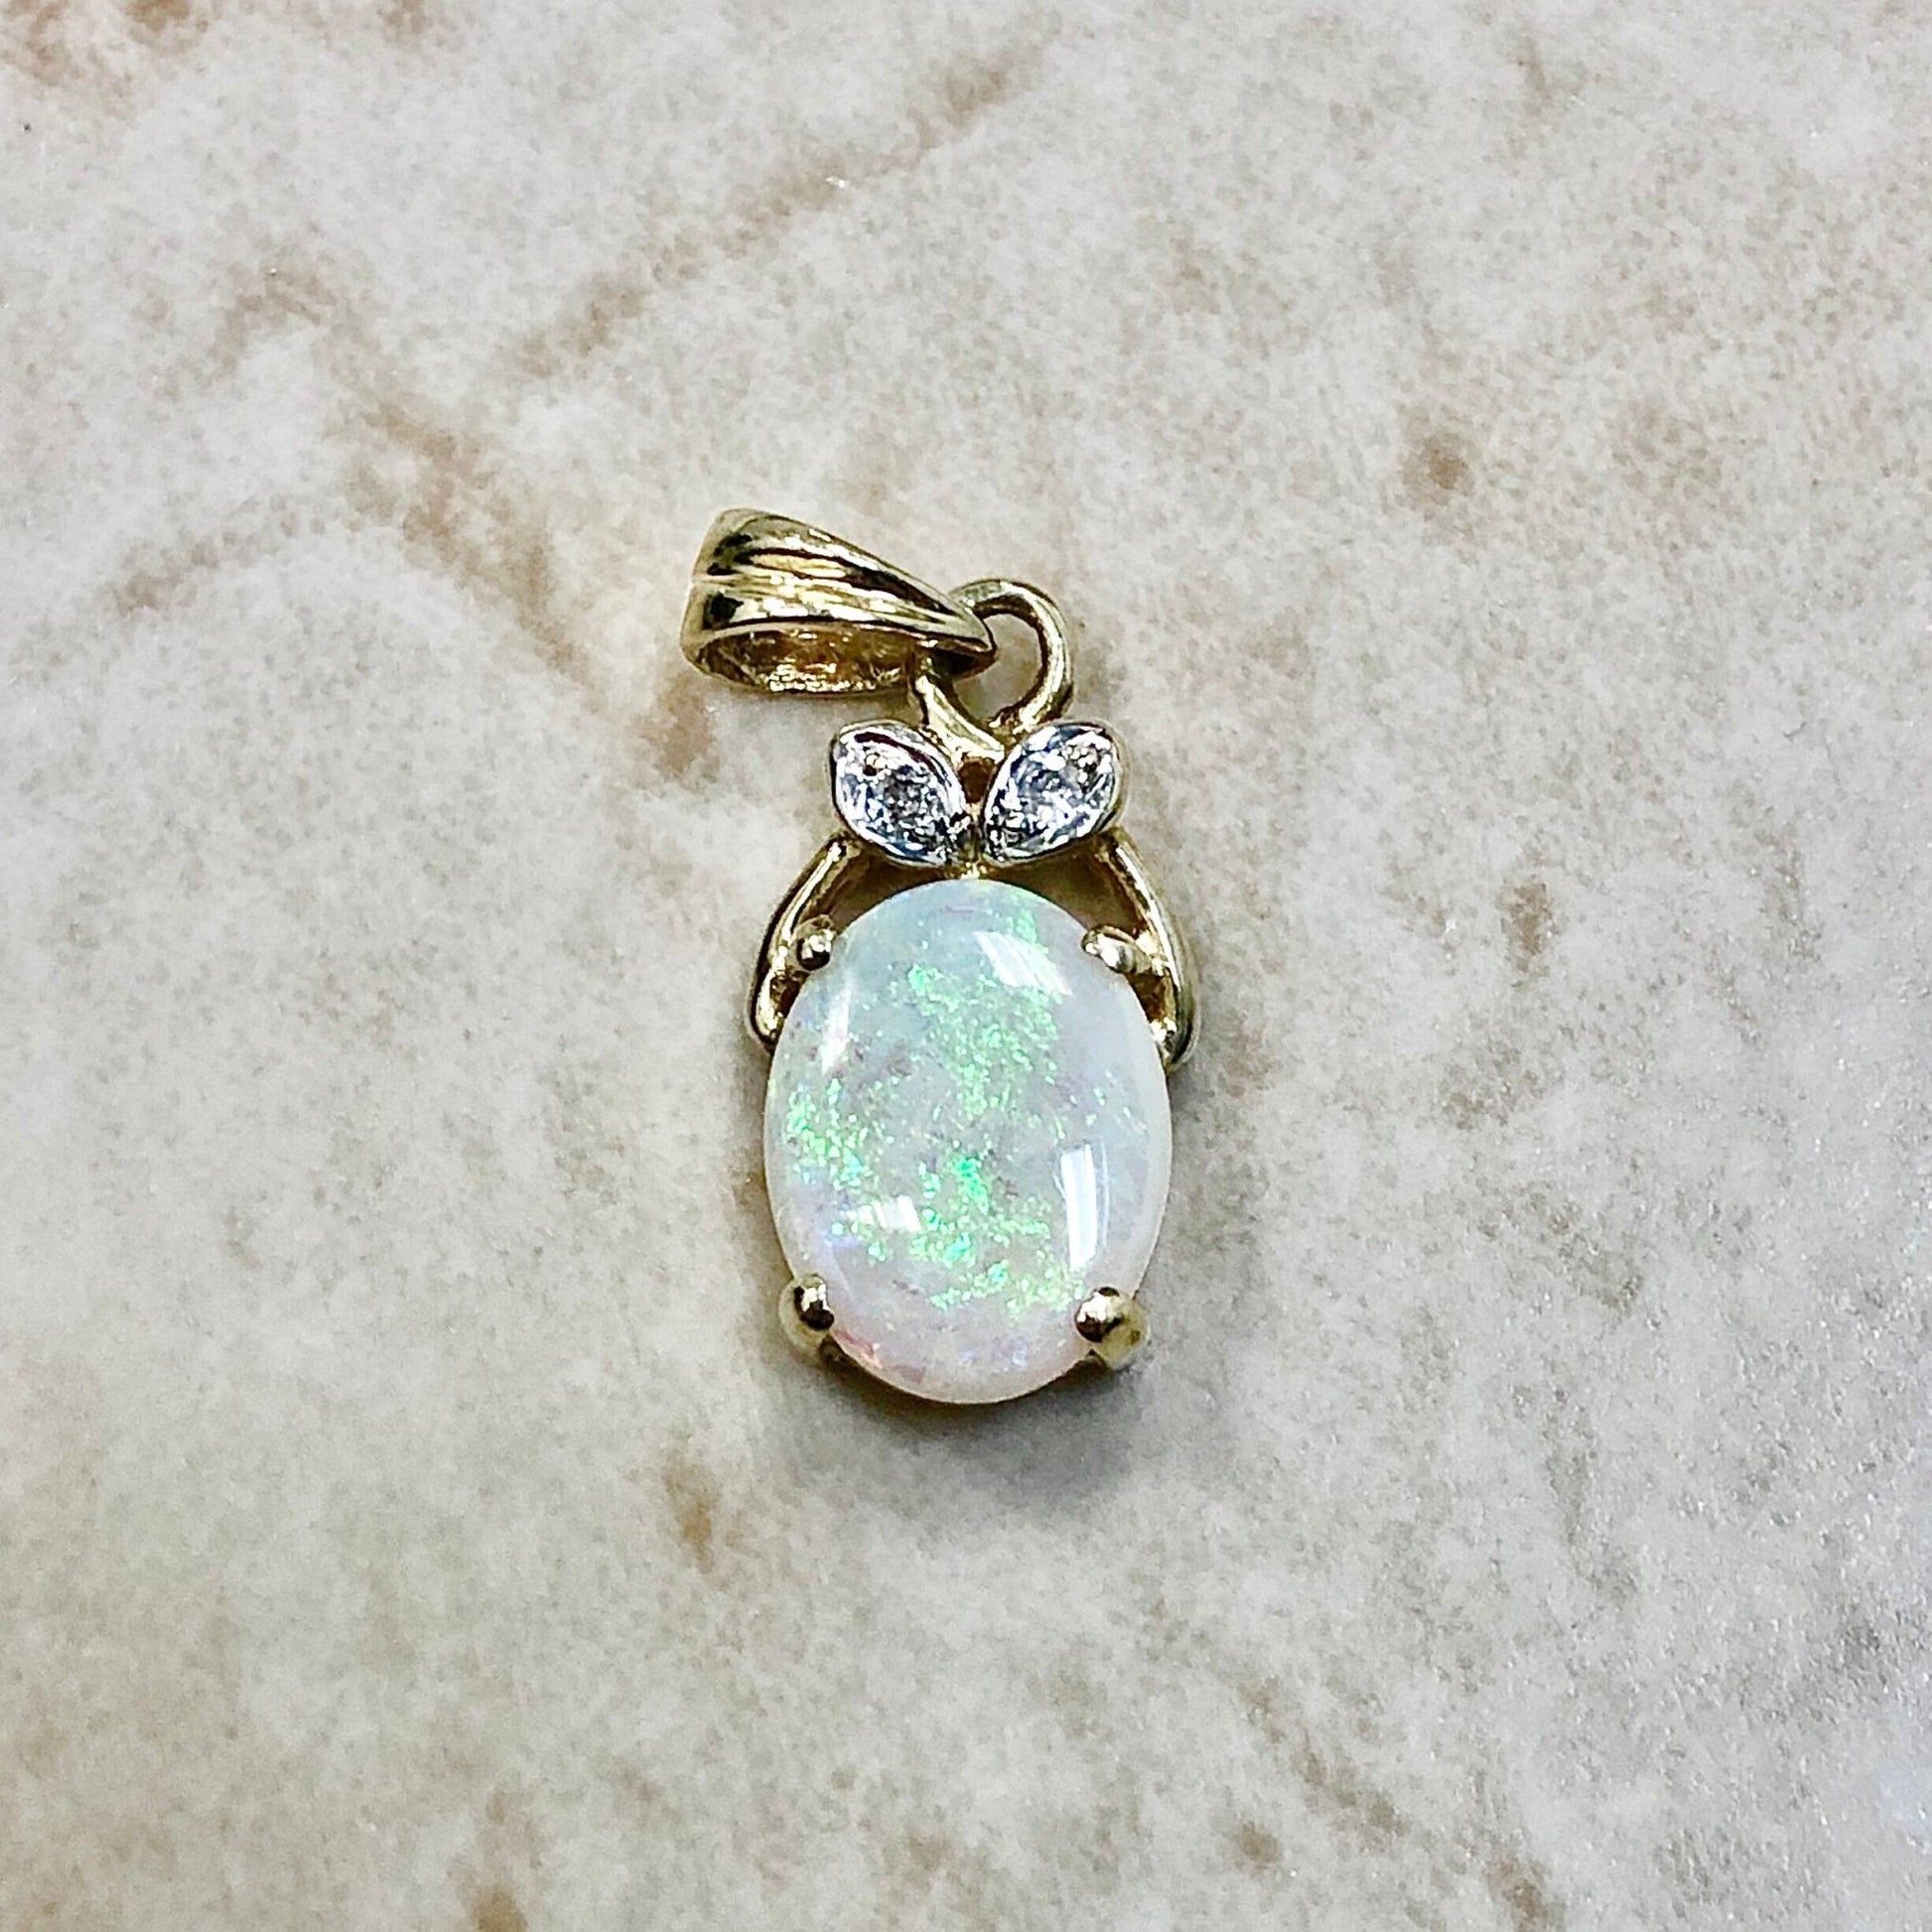 Vintage Natural Opal & Diamond Pendant Necklace - 14K Two Tone Gold - October Birthstone - Birthday Gift